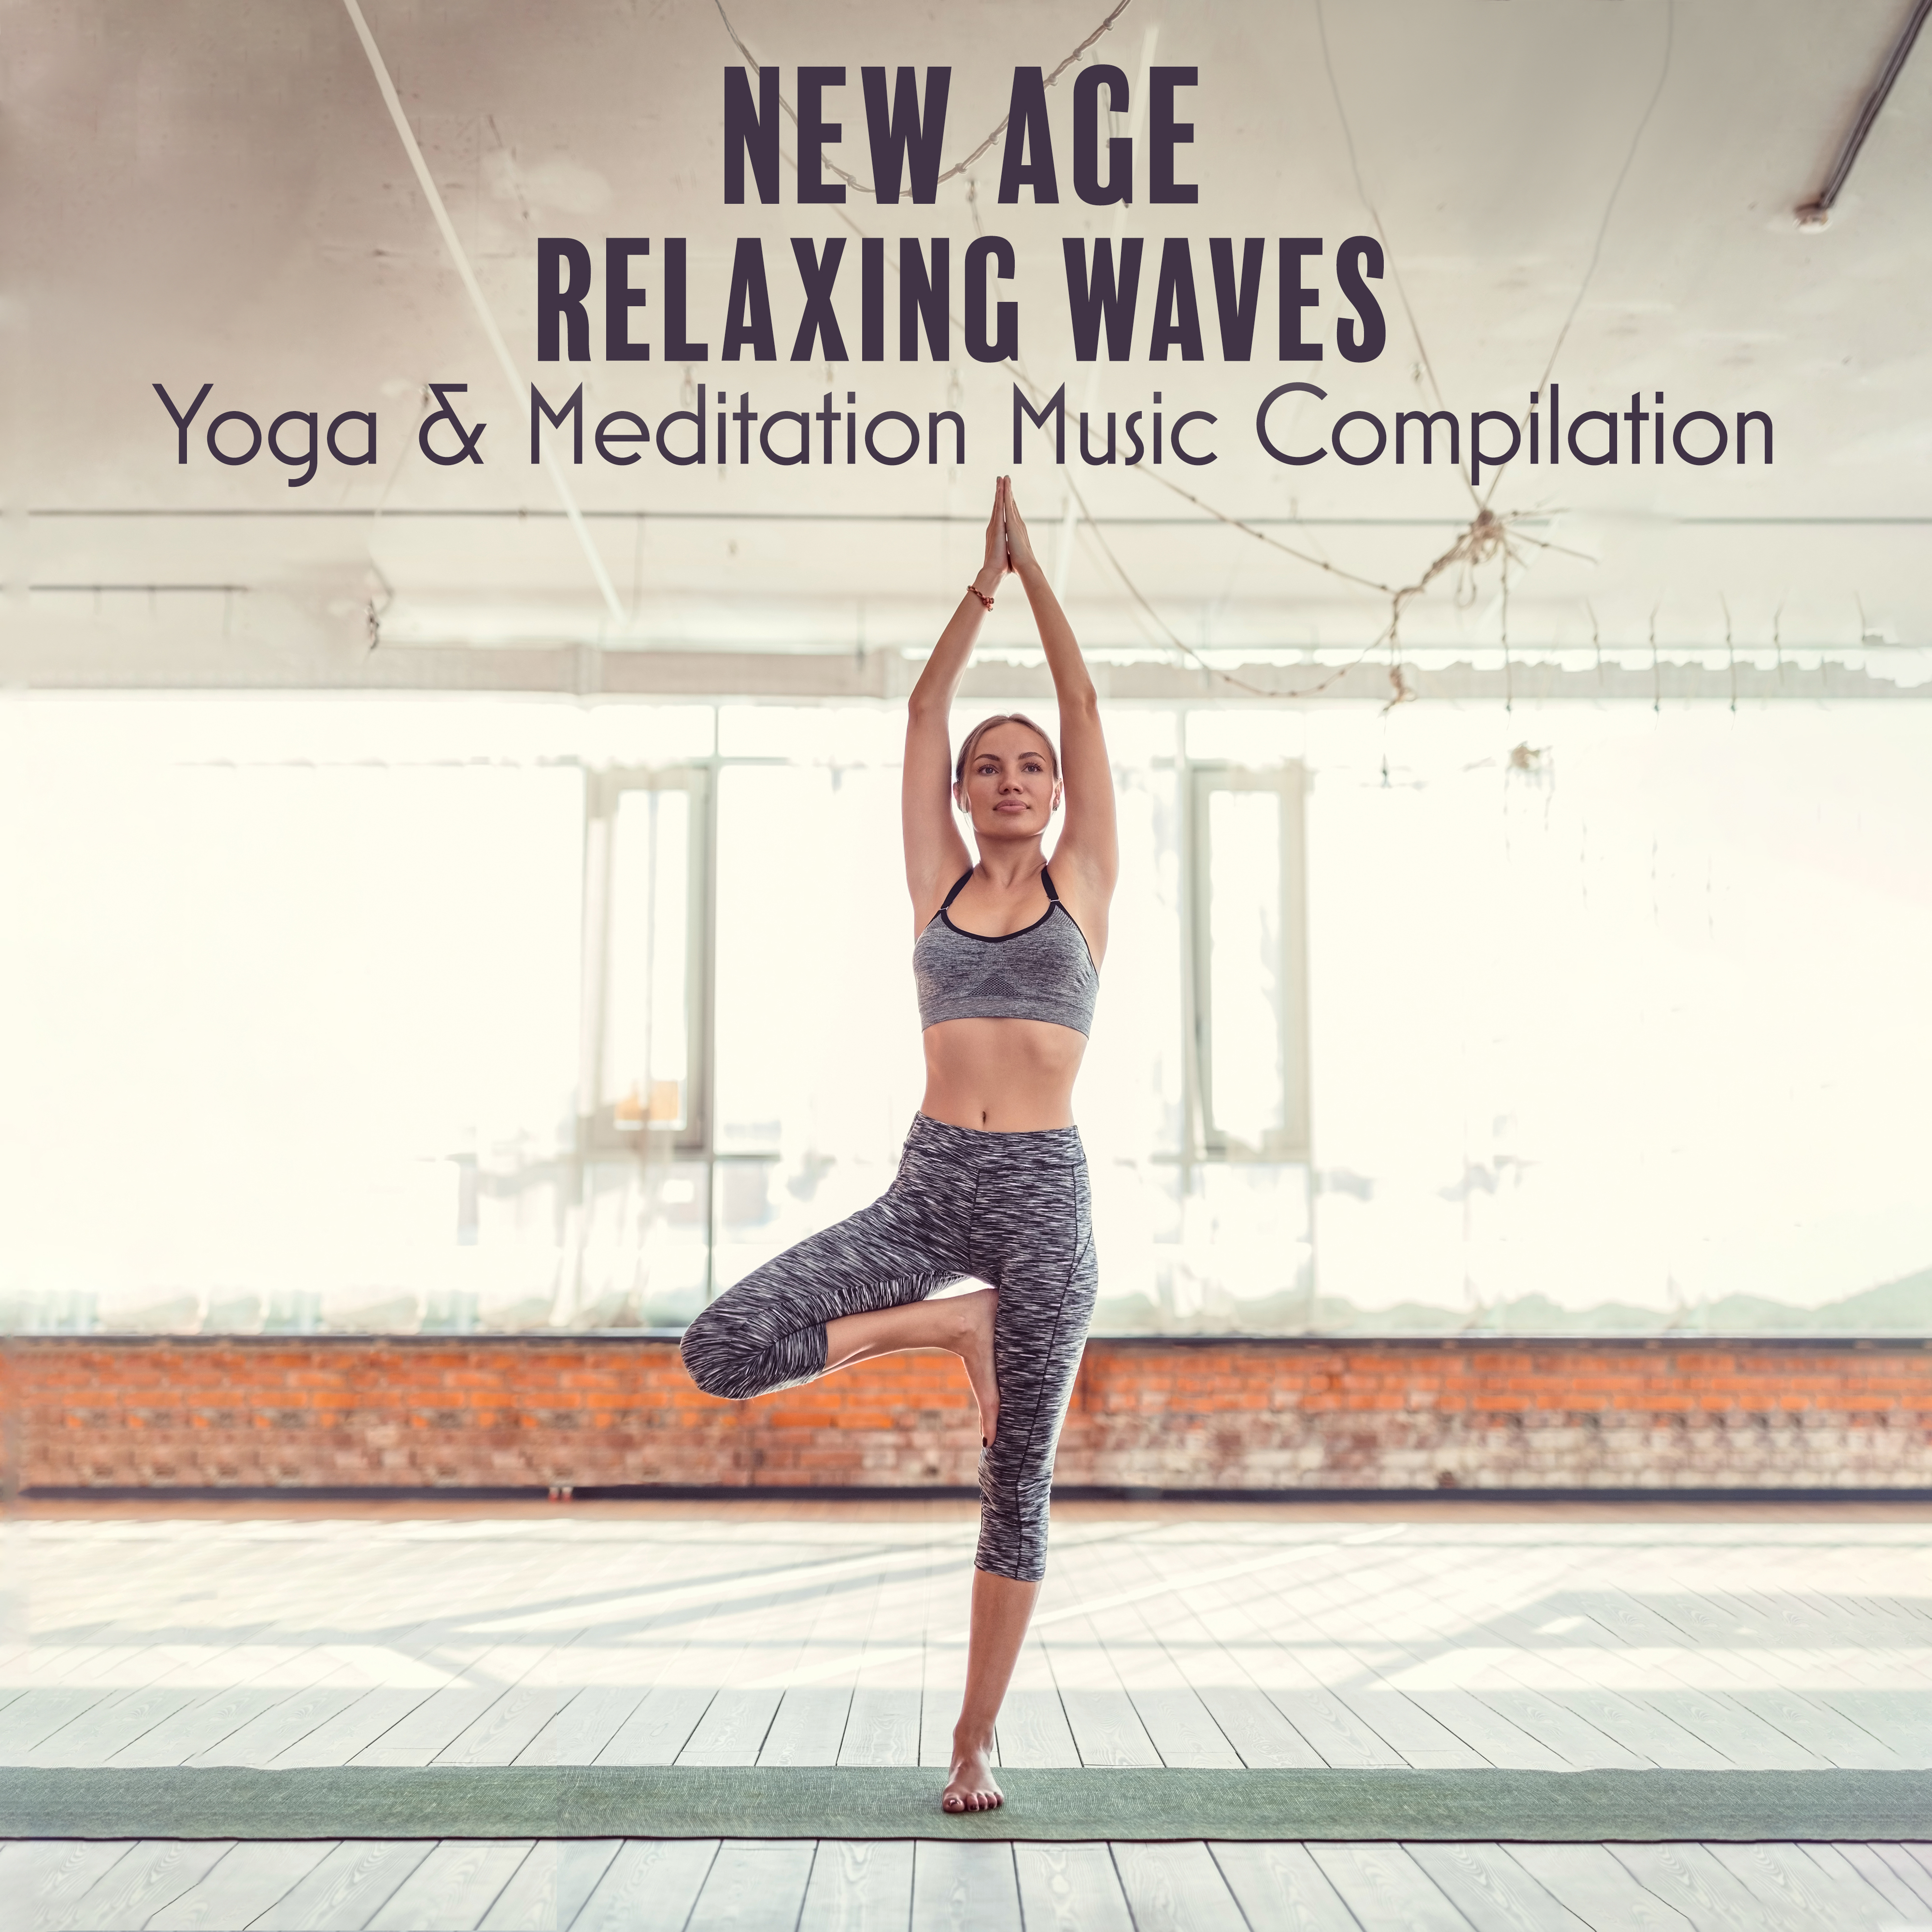 New Age Relaxing Waves  Yoga  Meditation Music Compilation